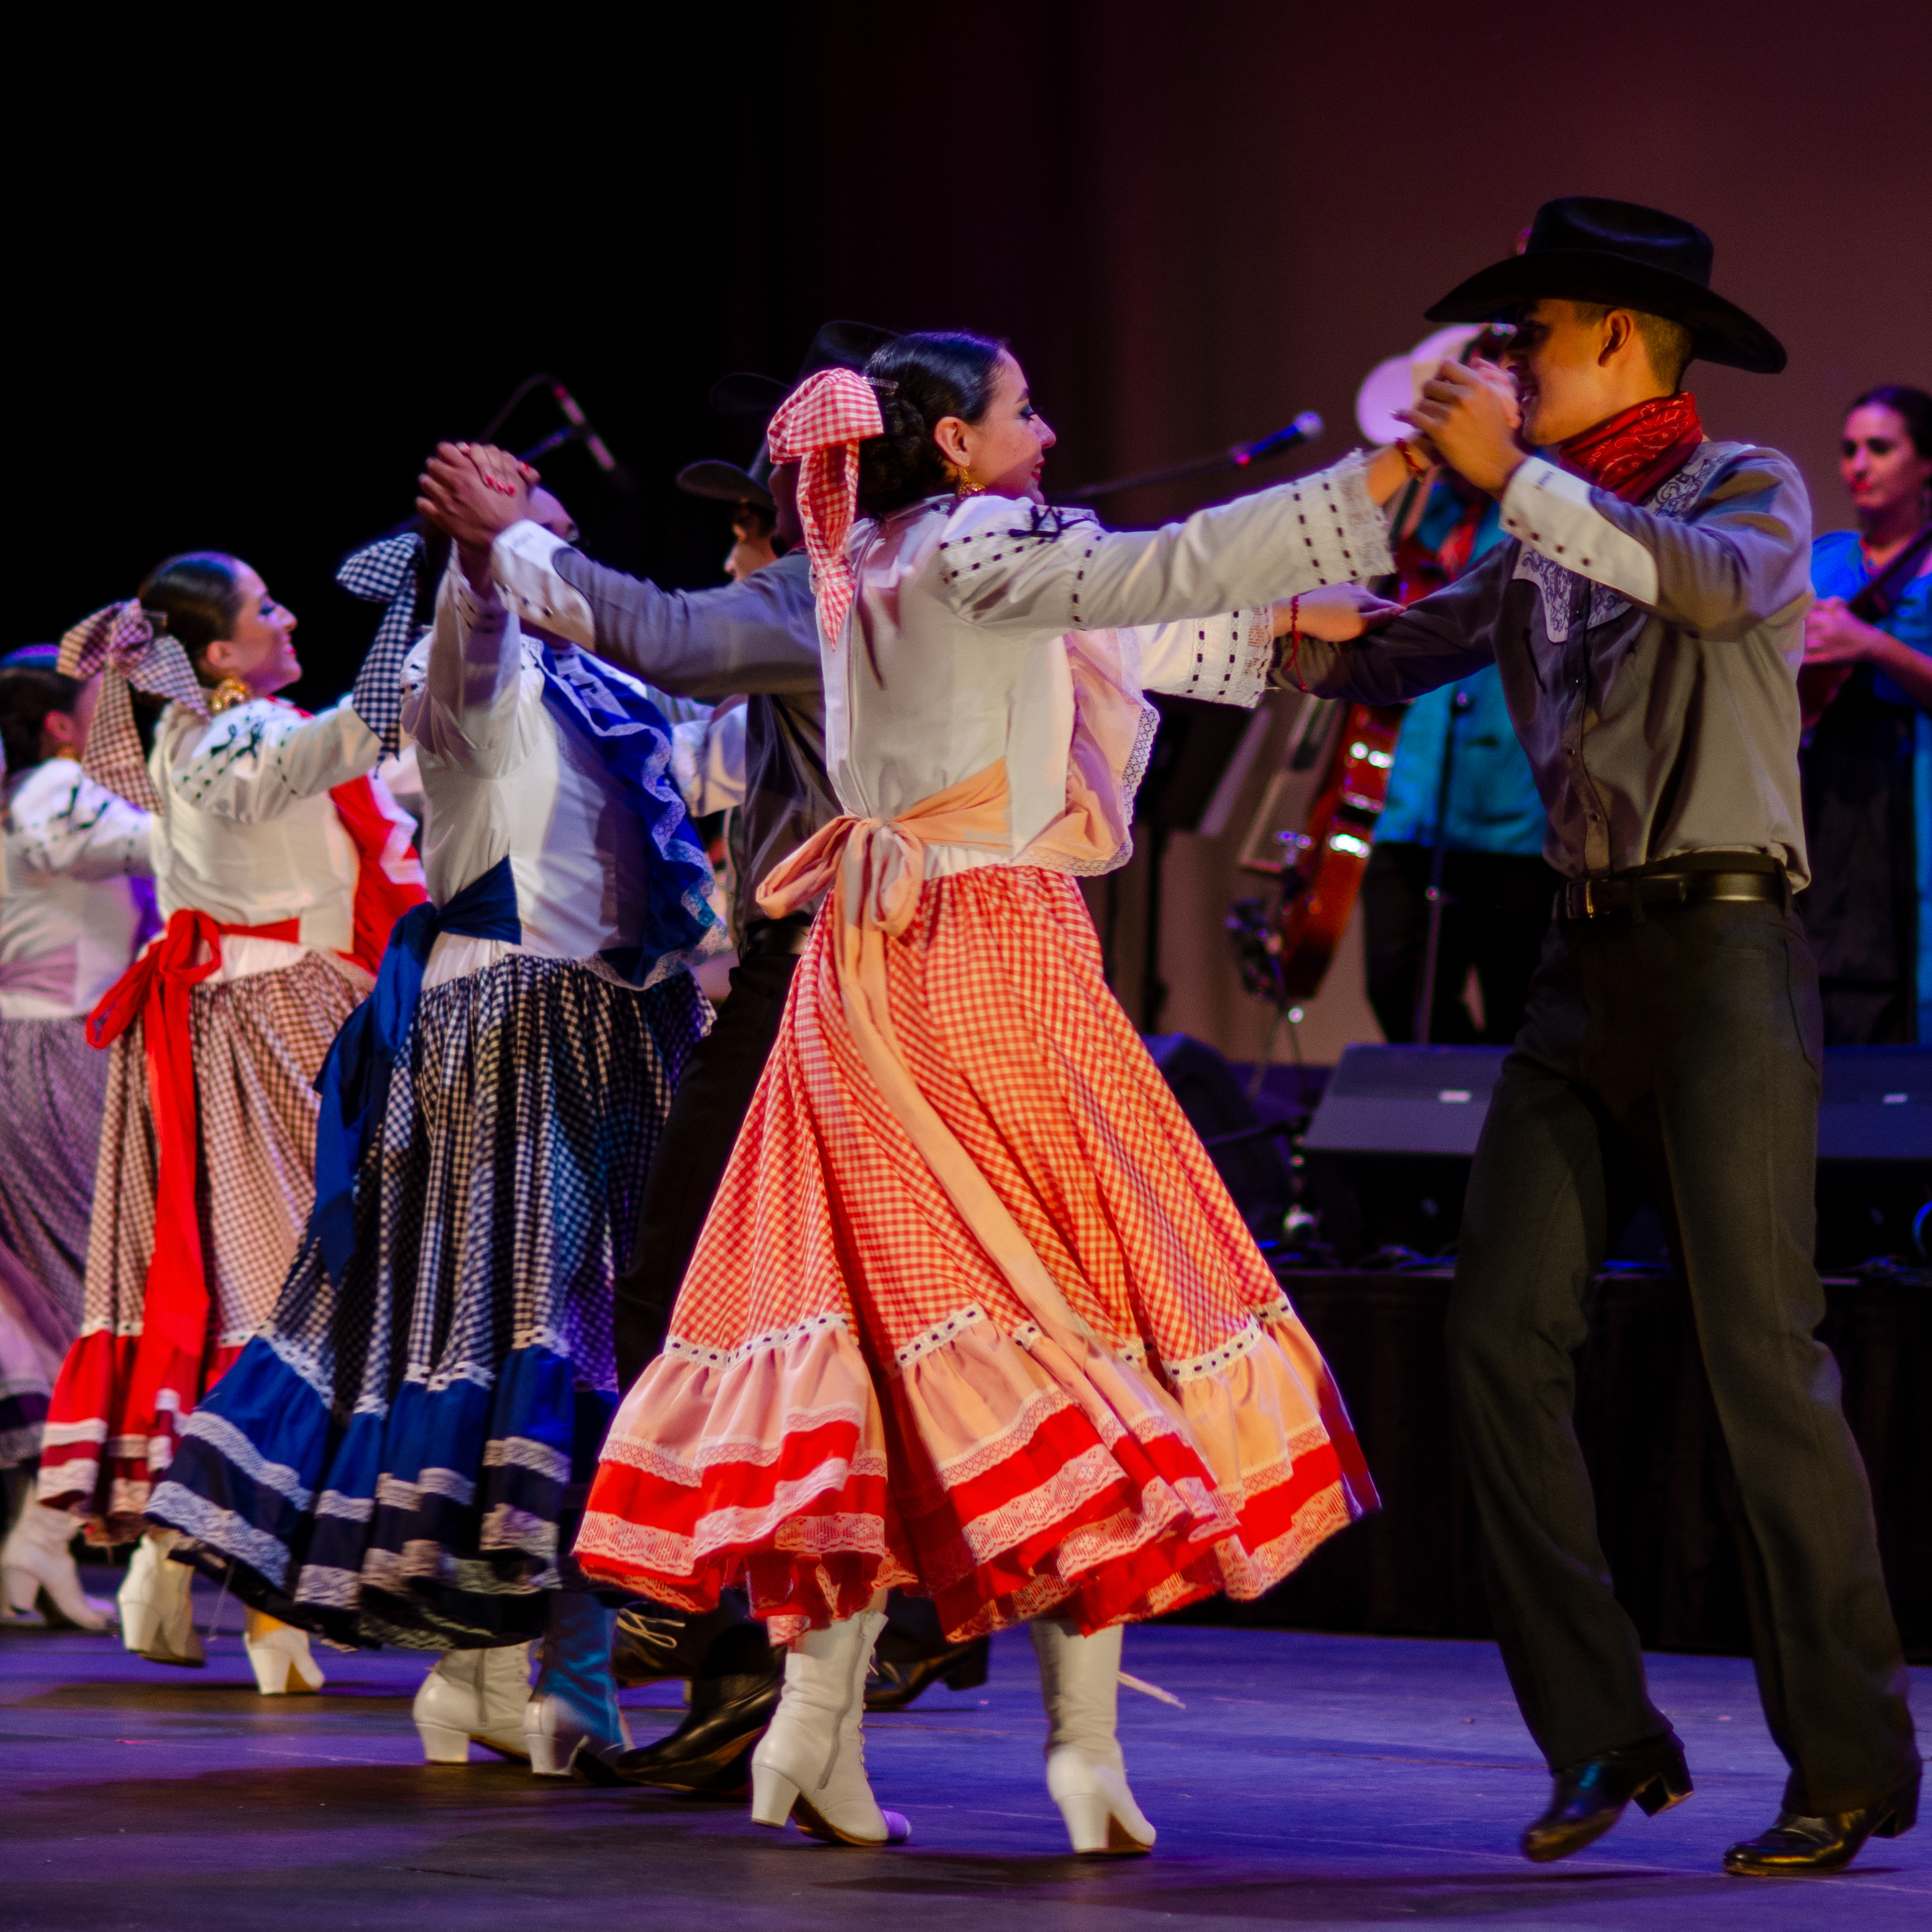 Mexican dance from the North of Mexico